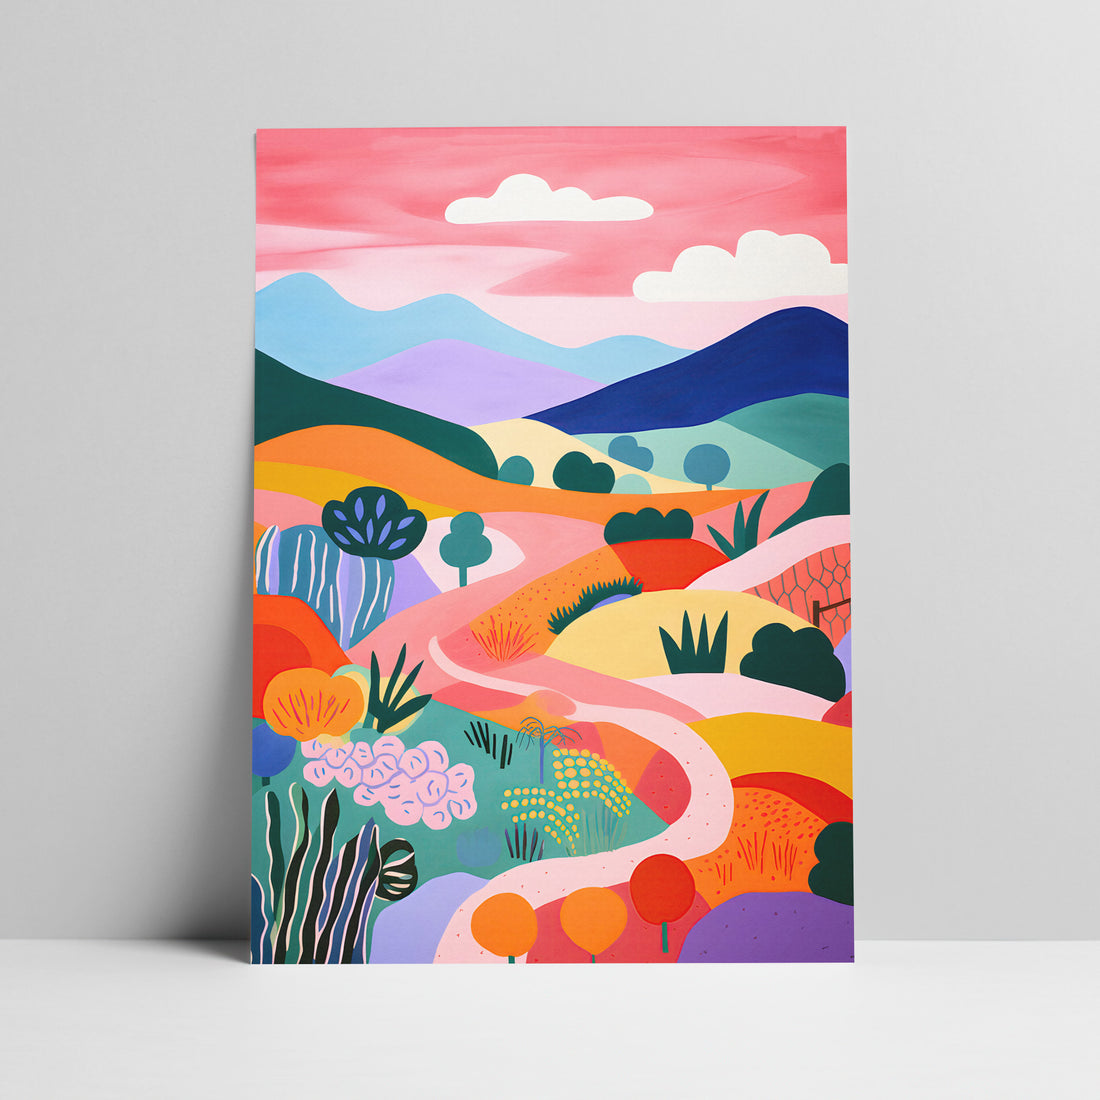 Abstract landscape with colorful hills and sky